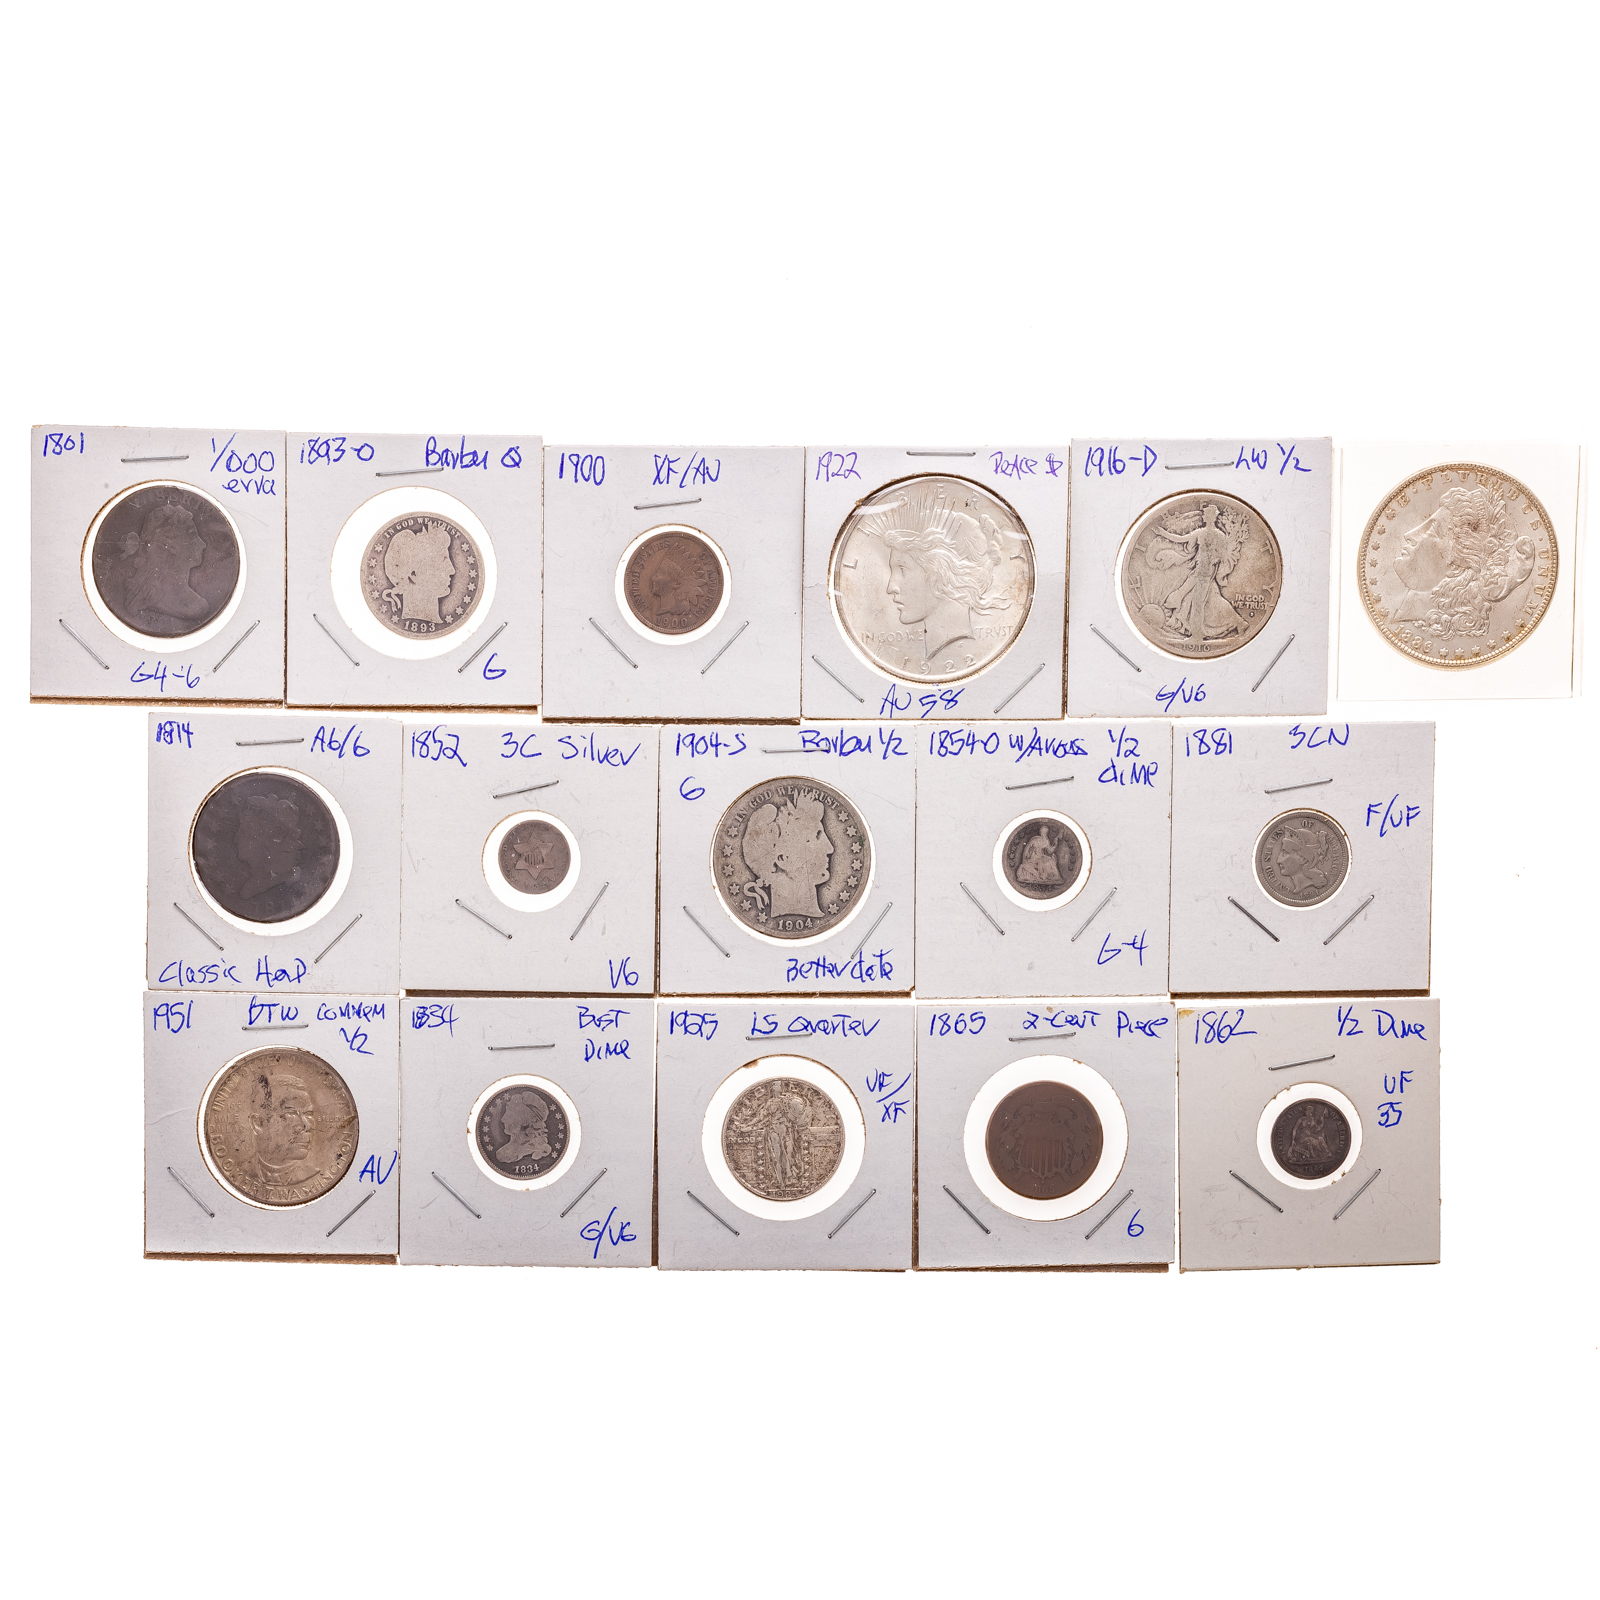 NICE GROUP OF US TYPE COINS 1801